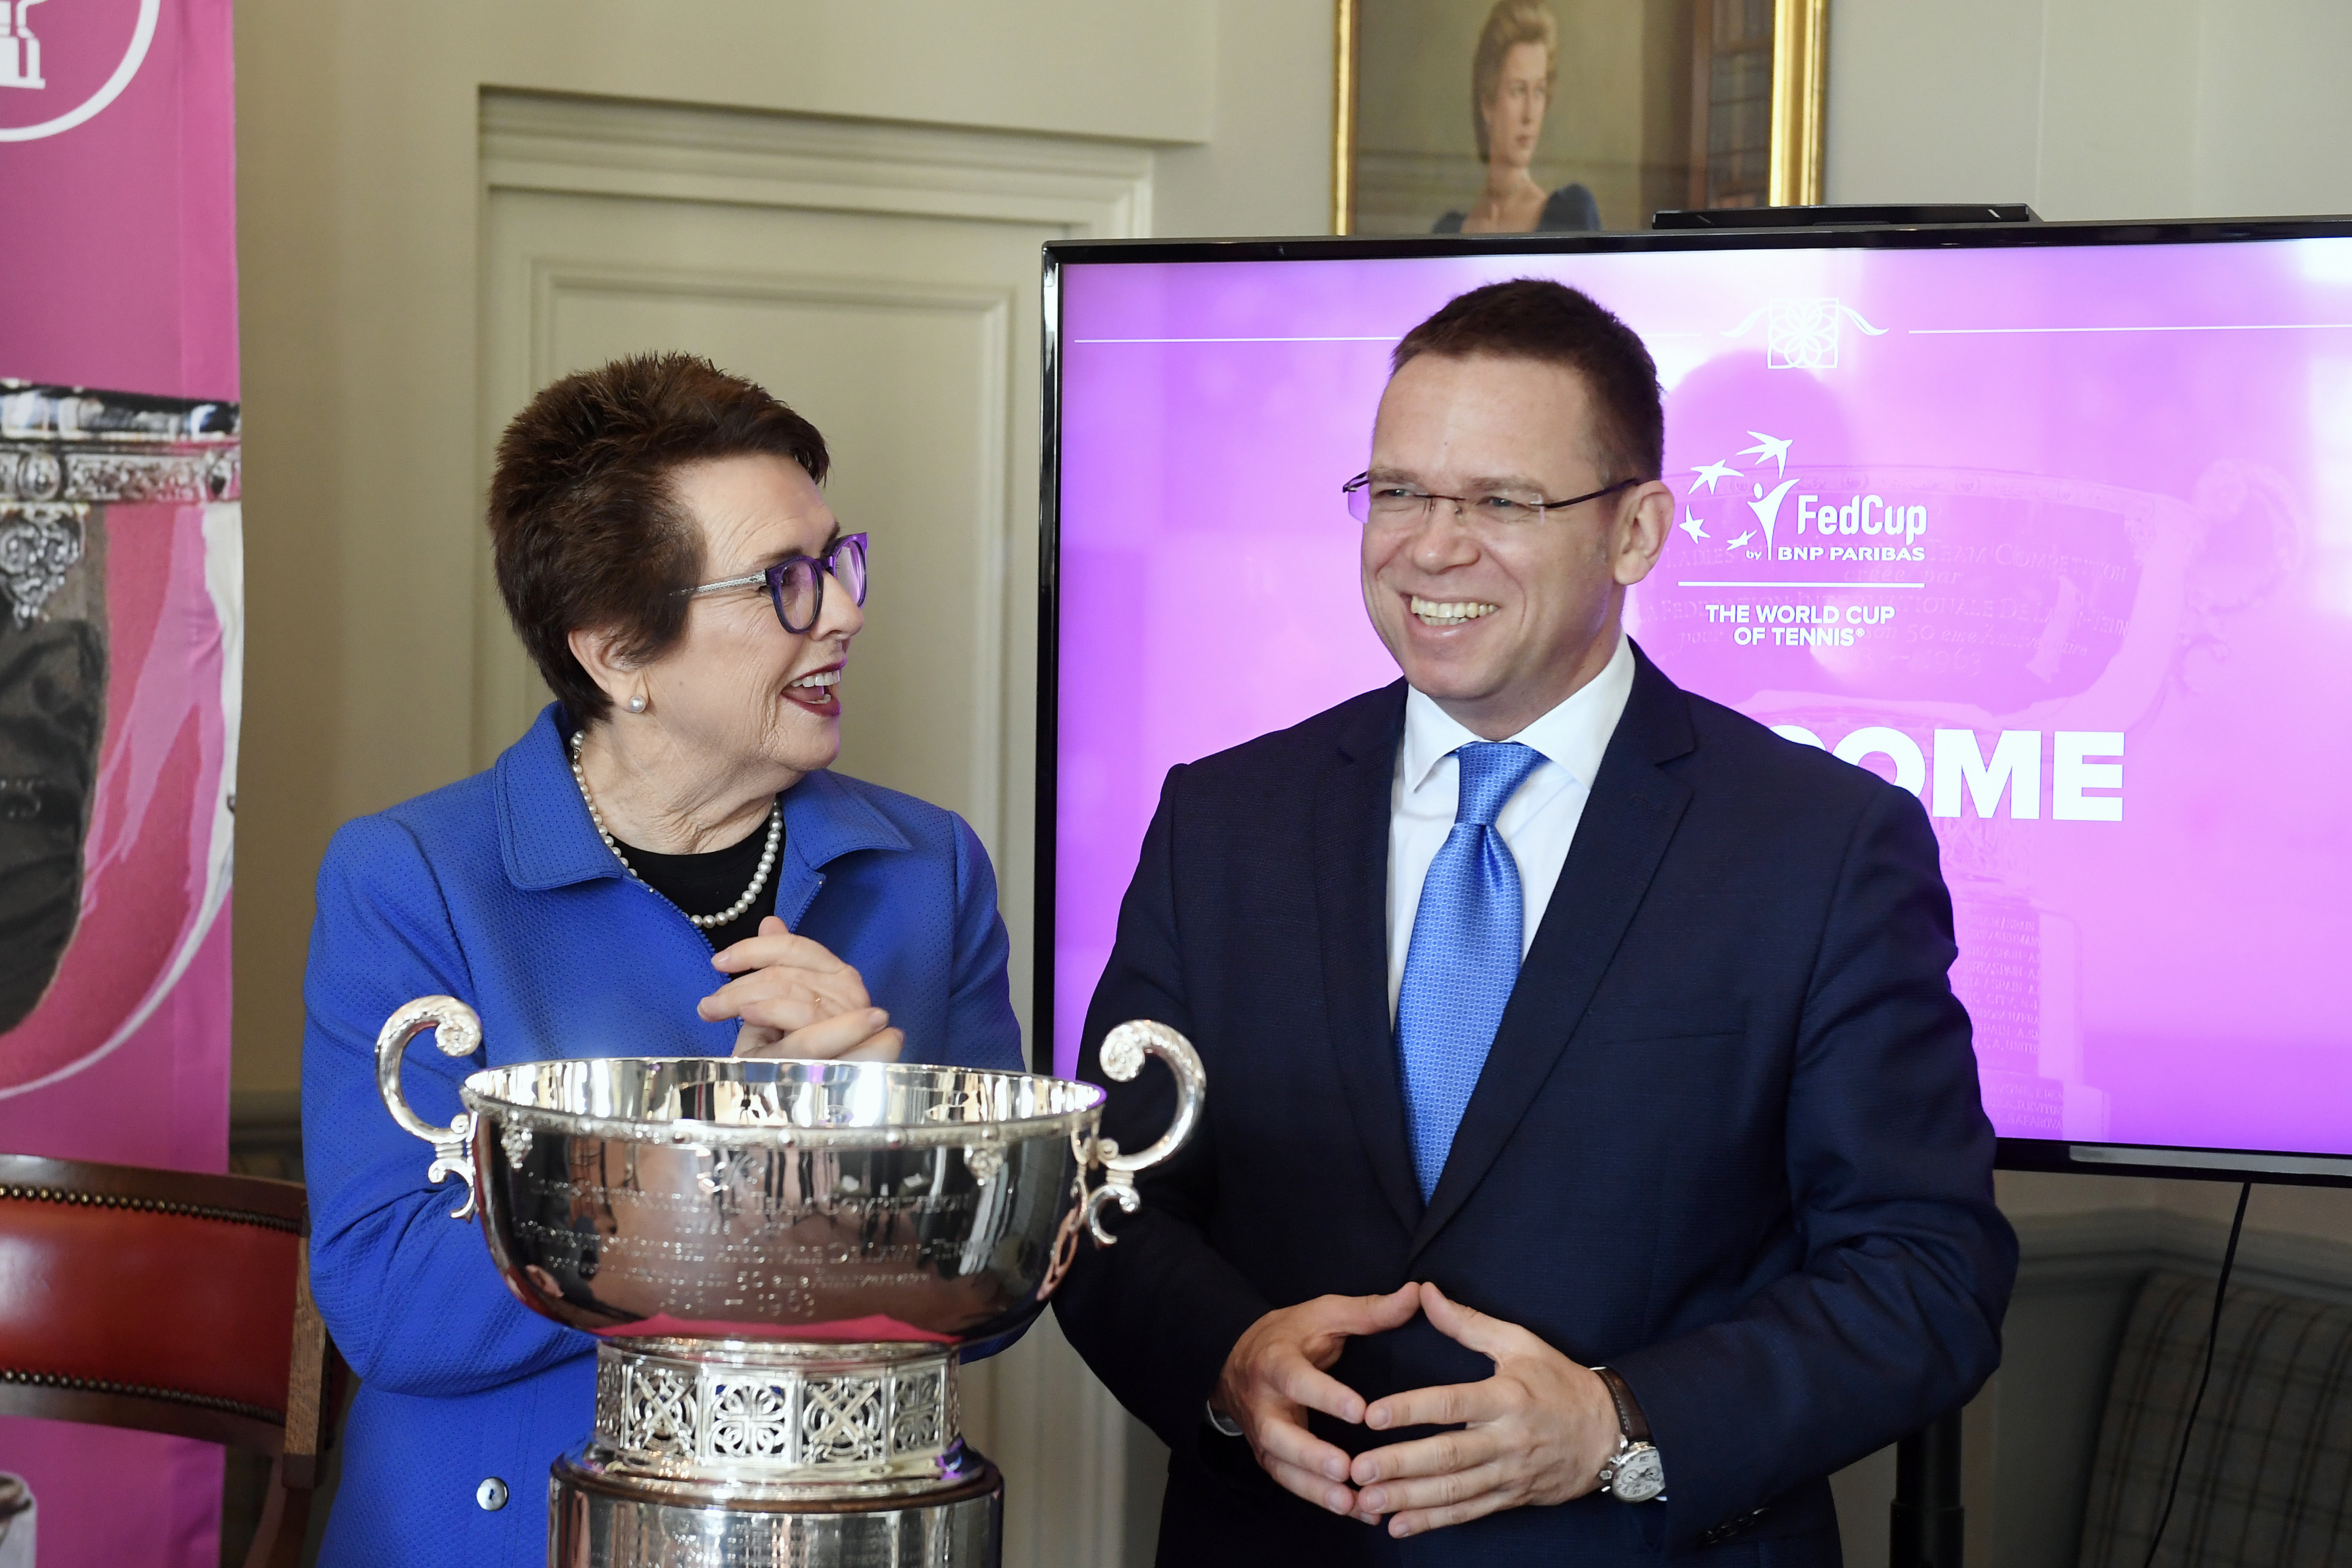 Budapest has been selected to host the finals of the women's tennis Fed Cup in 2020, 2021 and 2022